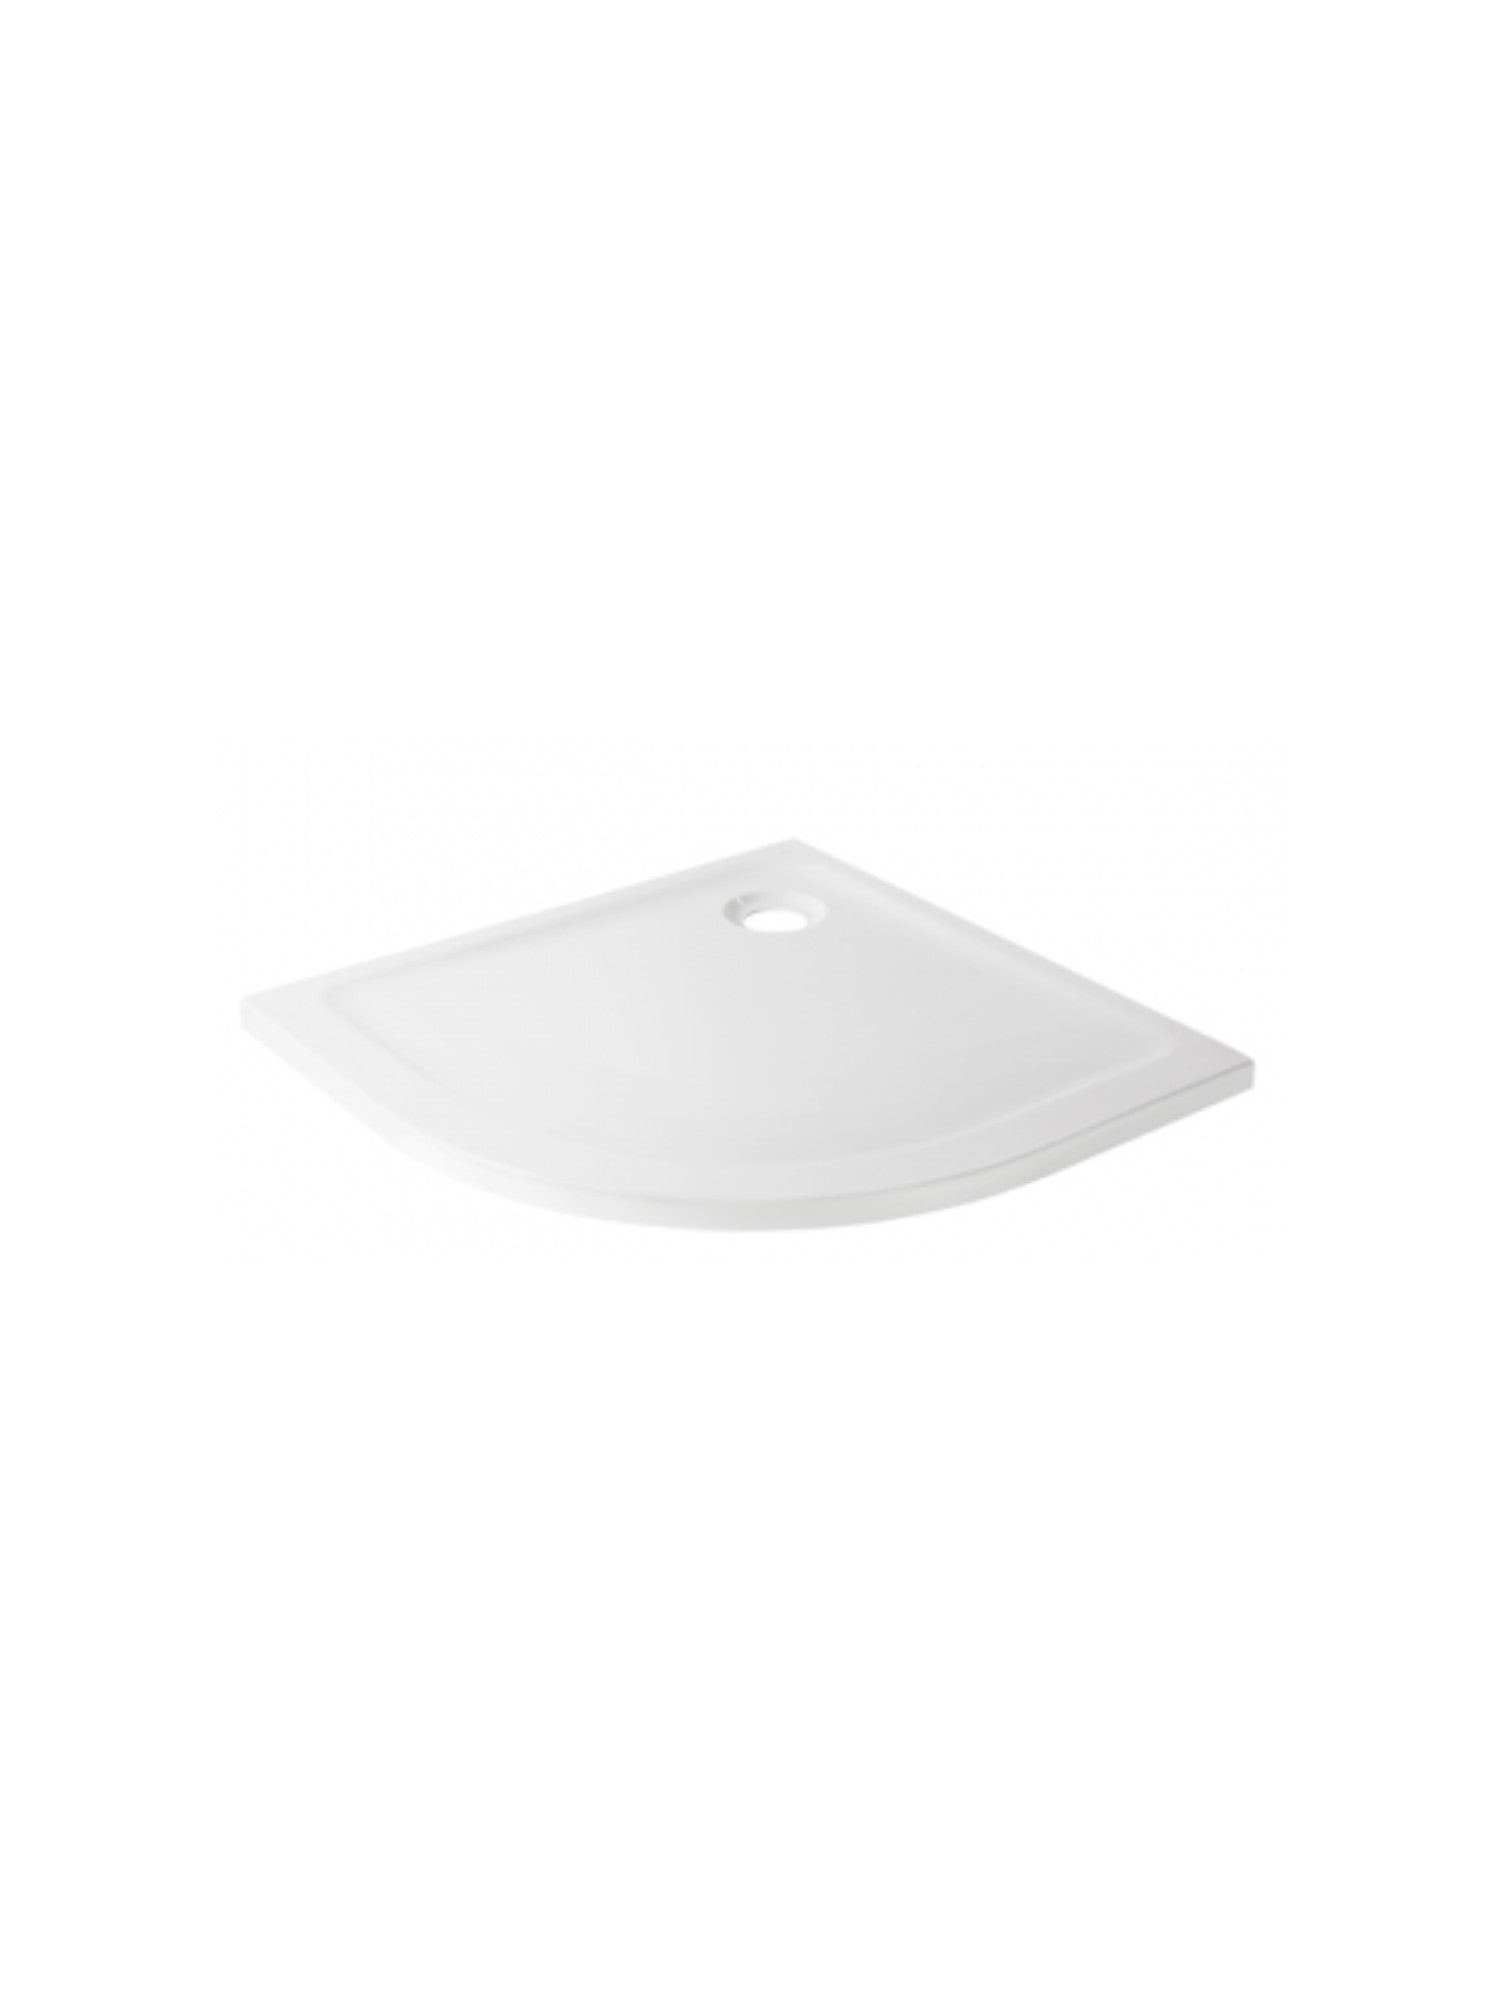 Face Shower tray #800180